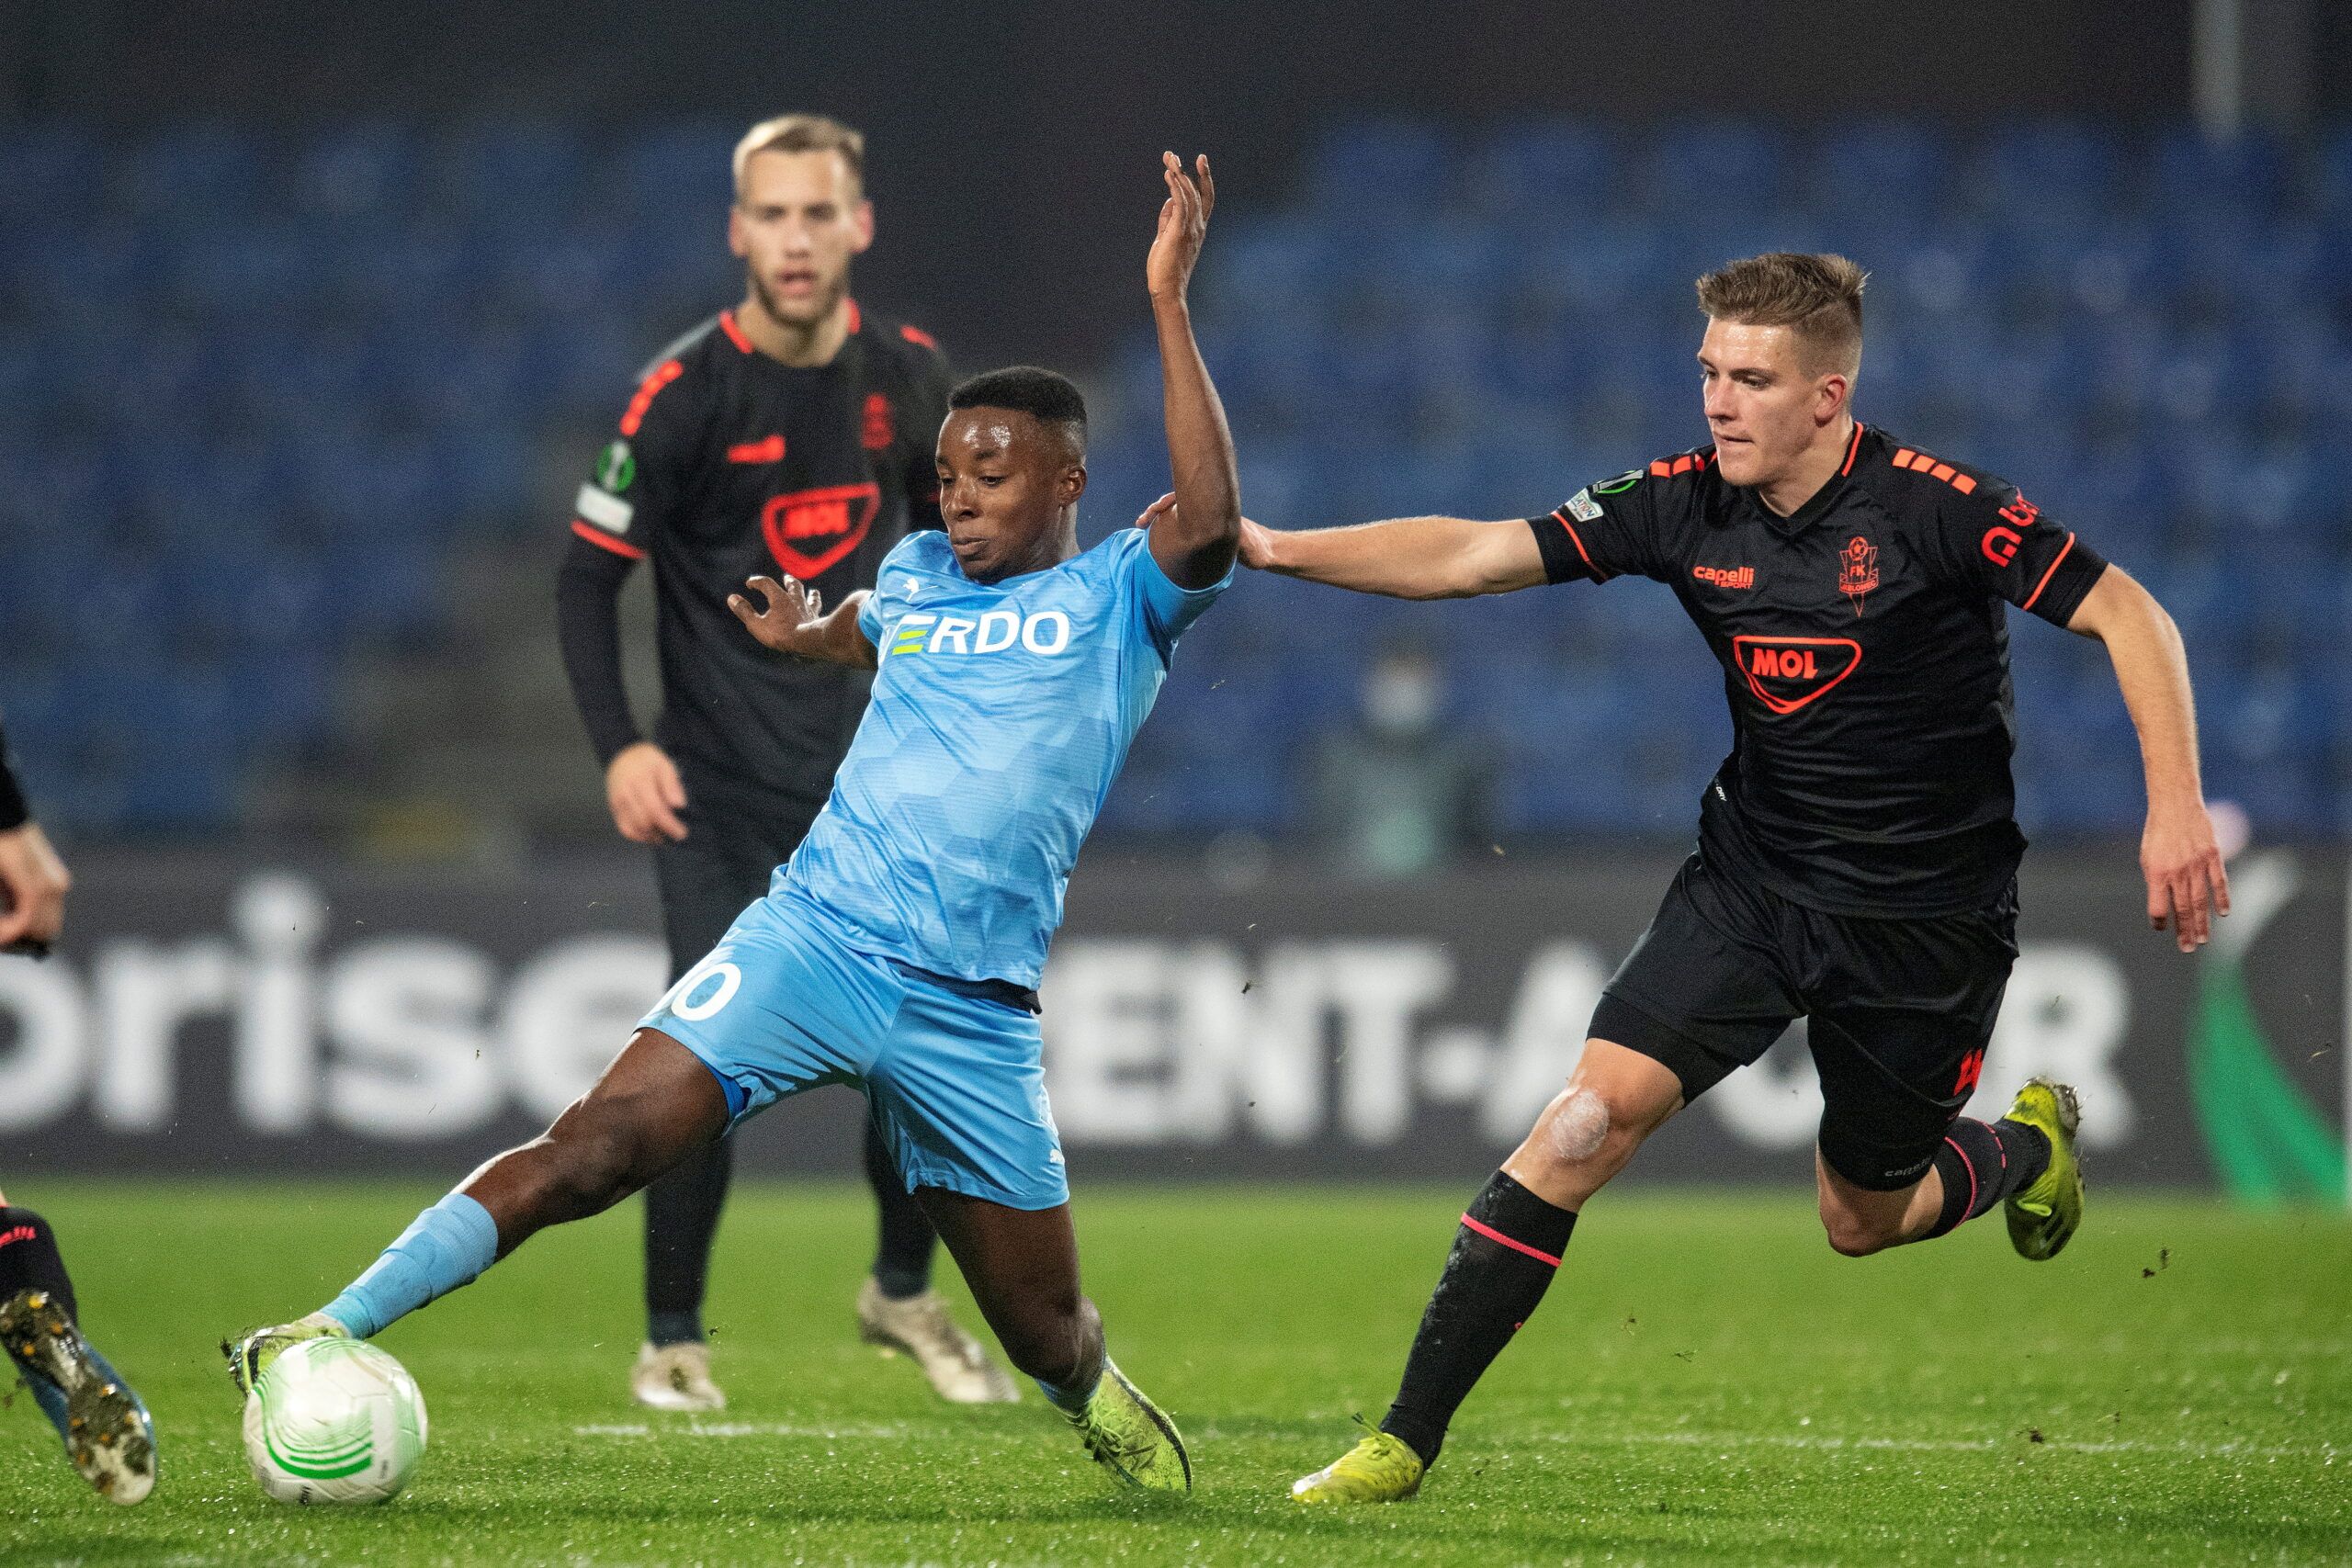 Soccer Football - Europa Conference League - Group D - Randers v Jablonec - Randers Stadium, Randers, Denmark - November 4, 2021 Randers Tosin Kehinde in action with Jablonec's Libor Holik Bo Amstrup/Ritzau Scanpix via REUTERS      ATTENTION EDITORS - THIS IMAGE WAS PROVIDED BY A THIRD PARTY. DENMARK OUT. NO COMMERCIAL OR EDITORIAL SALES IN DENMARK.